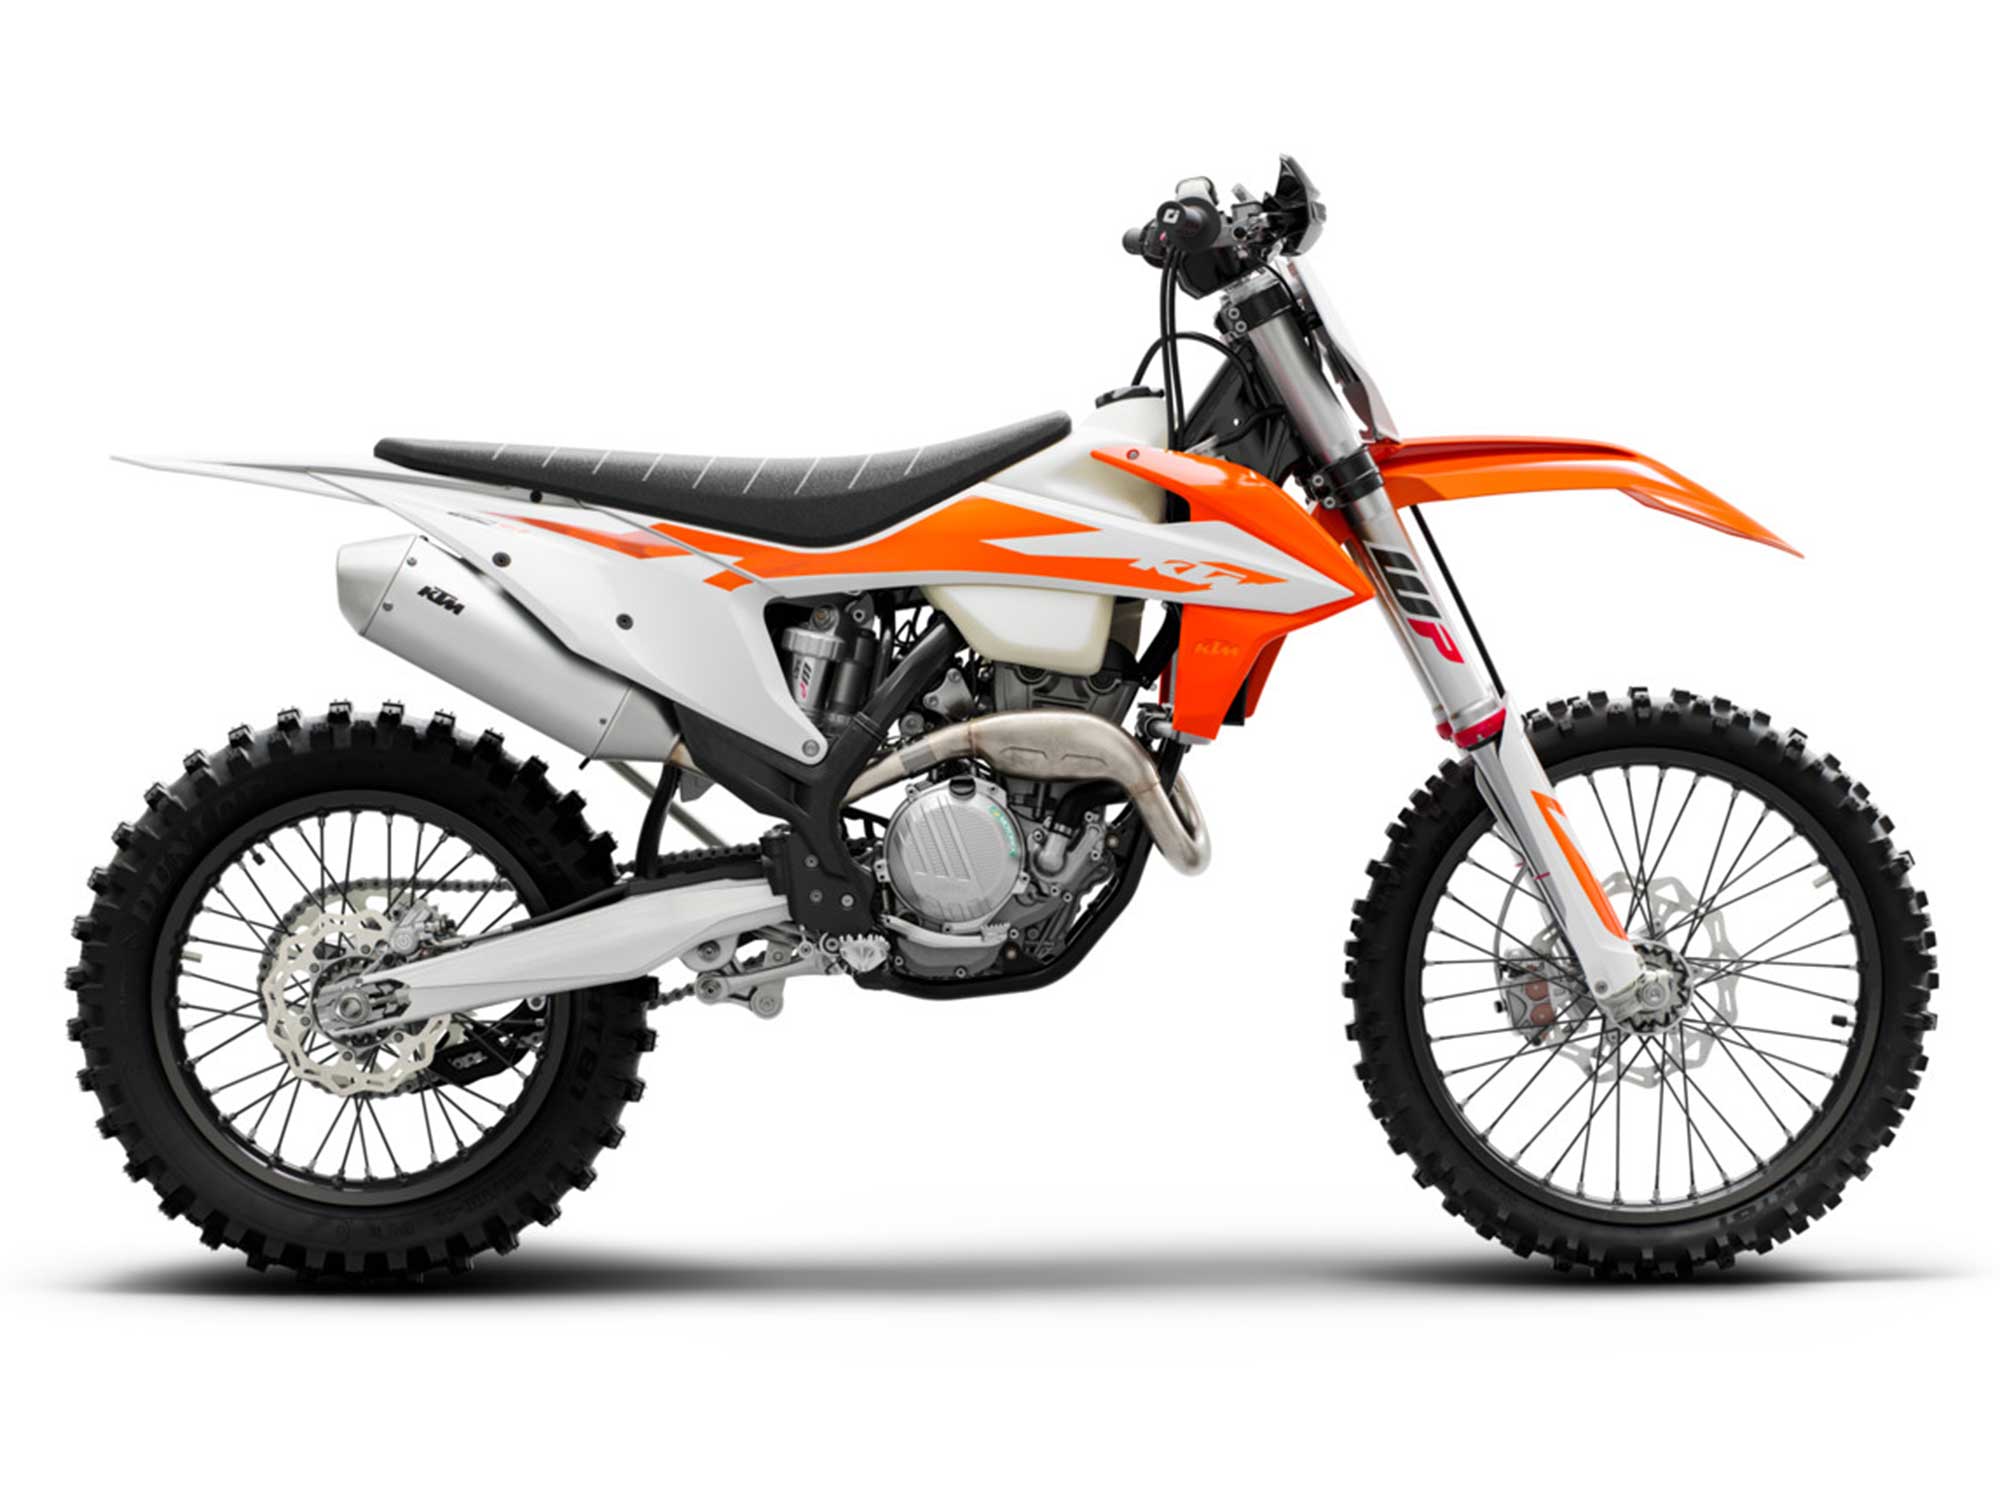 2020 KTM 250 XC-F Buyer's Guide: Specs, Photos, Price | Cycle World